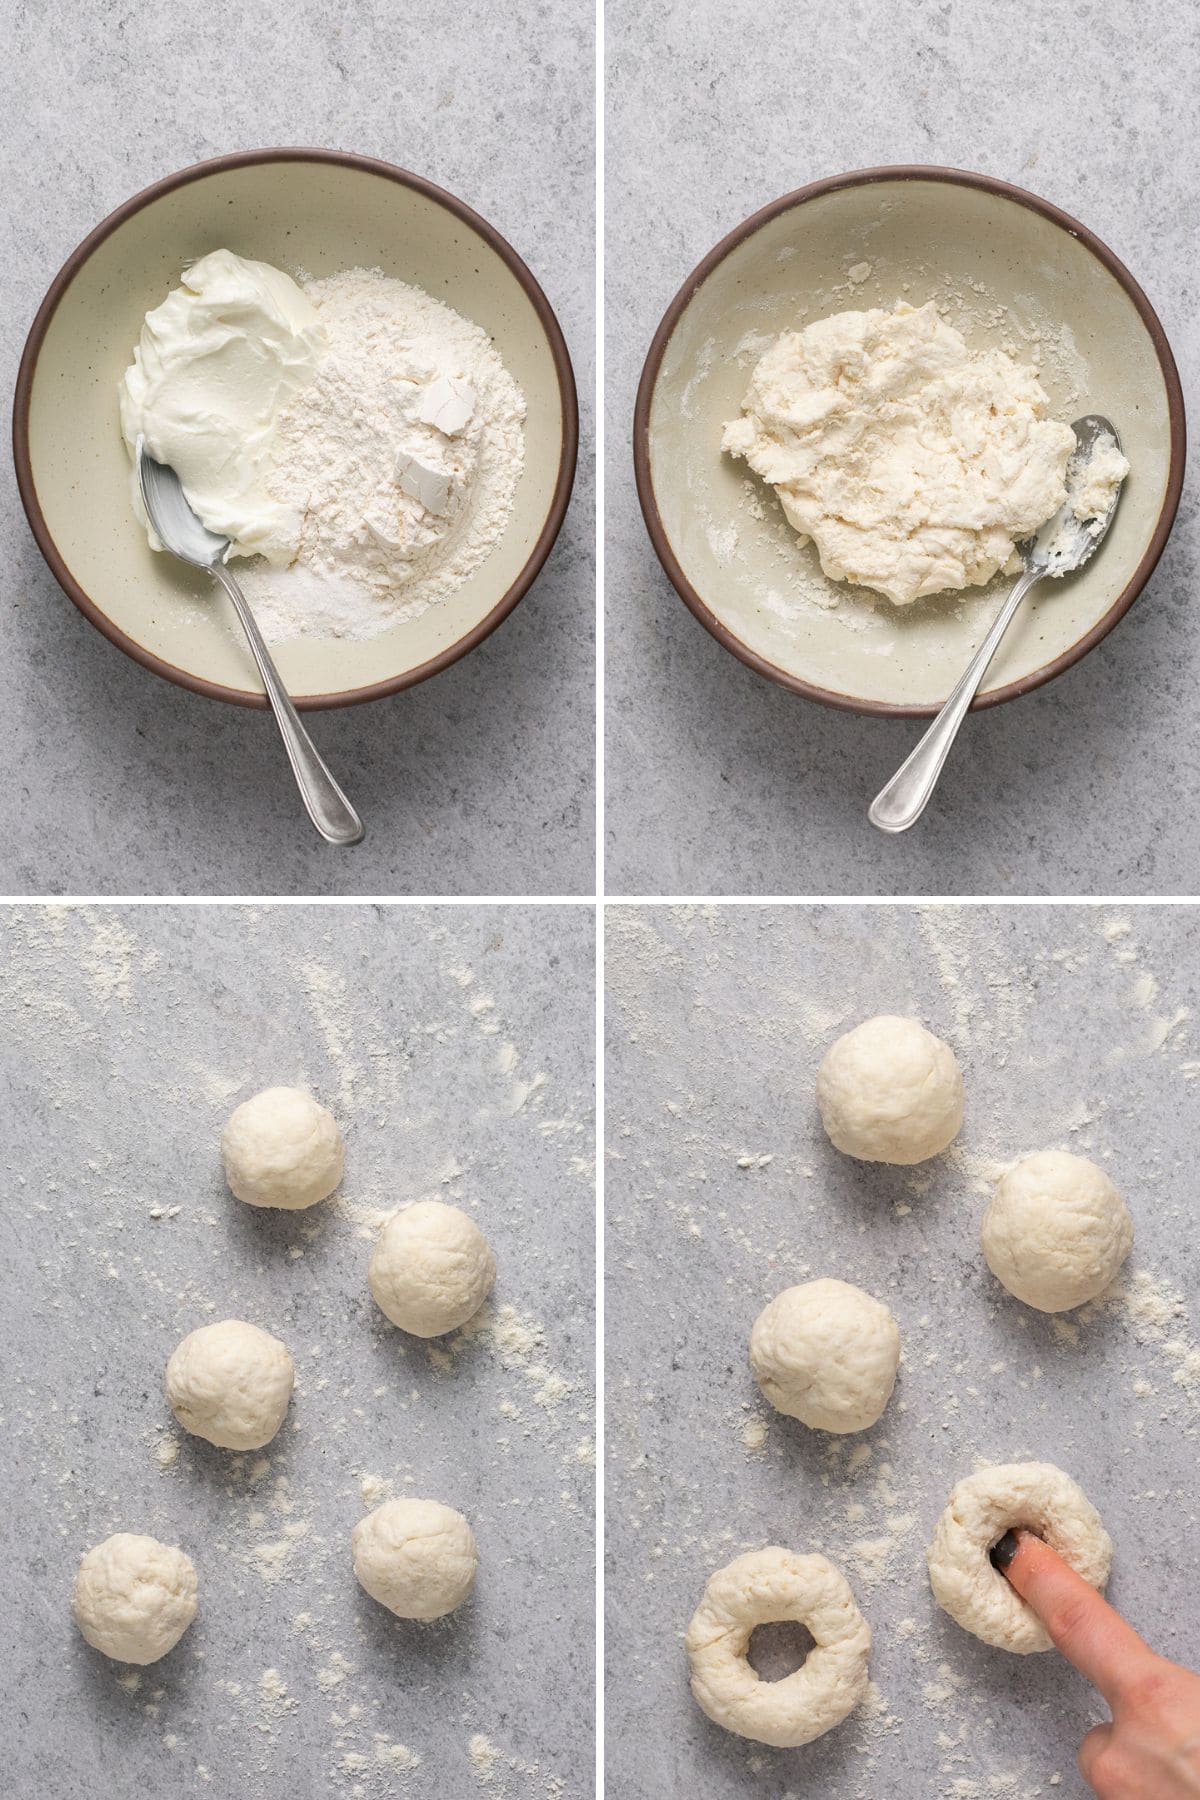 Collage of mixing dough and forming it into balls.